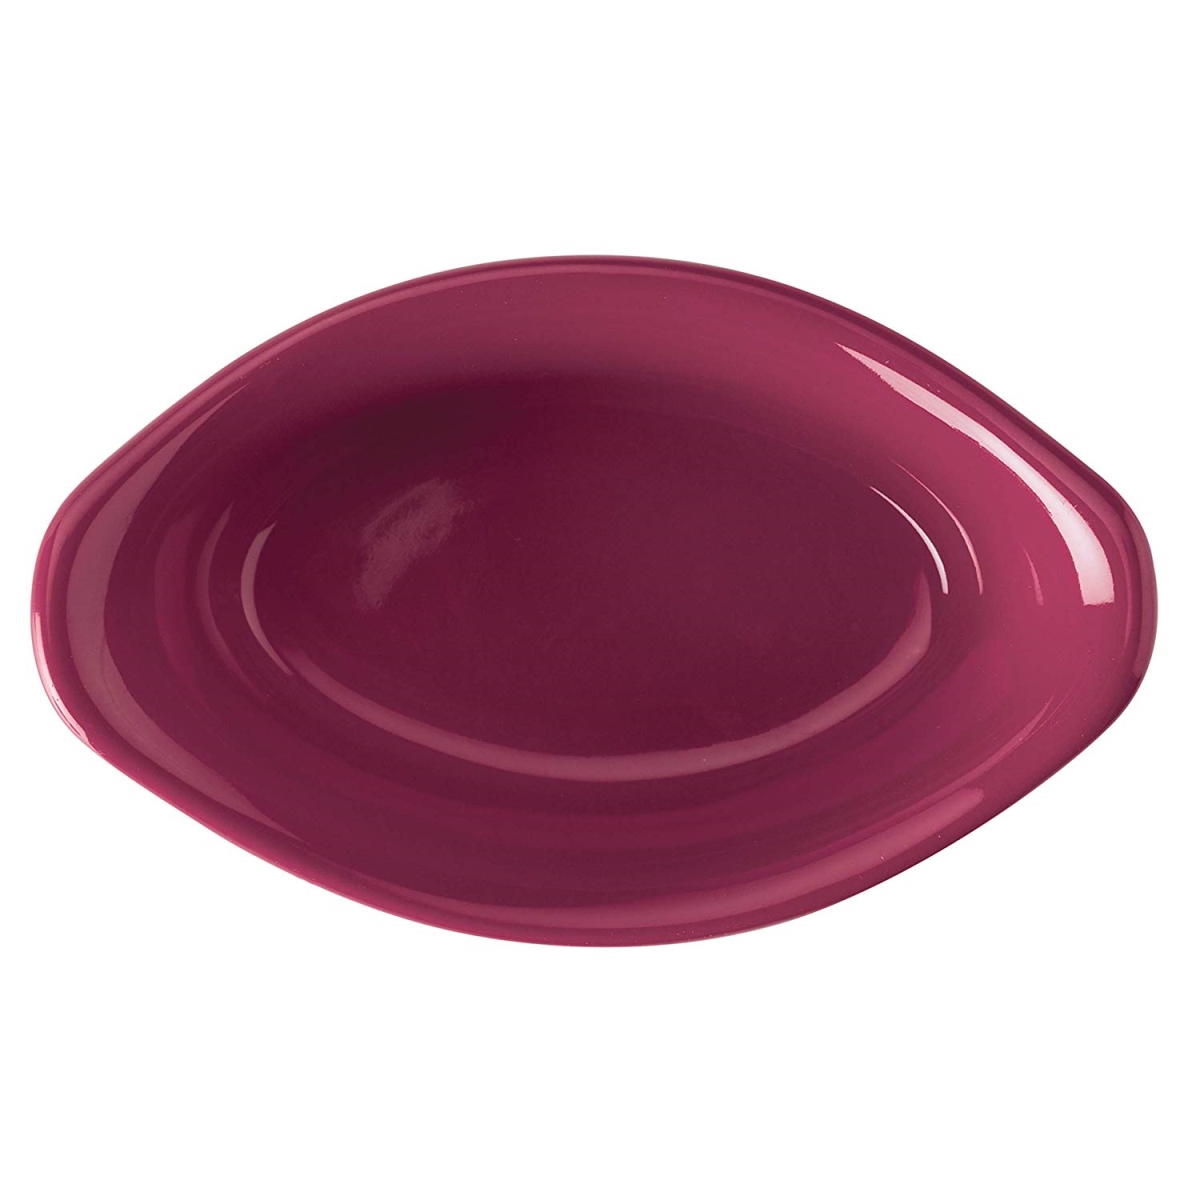 47865 Ceramics Oval Dipping Cups, Burgundy - 4 Piece